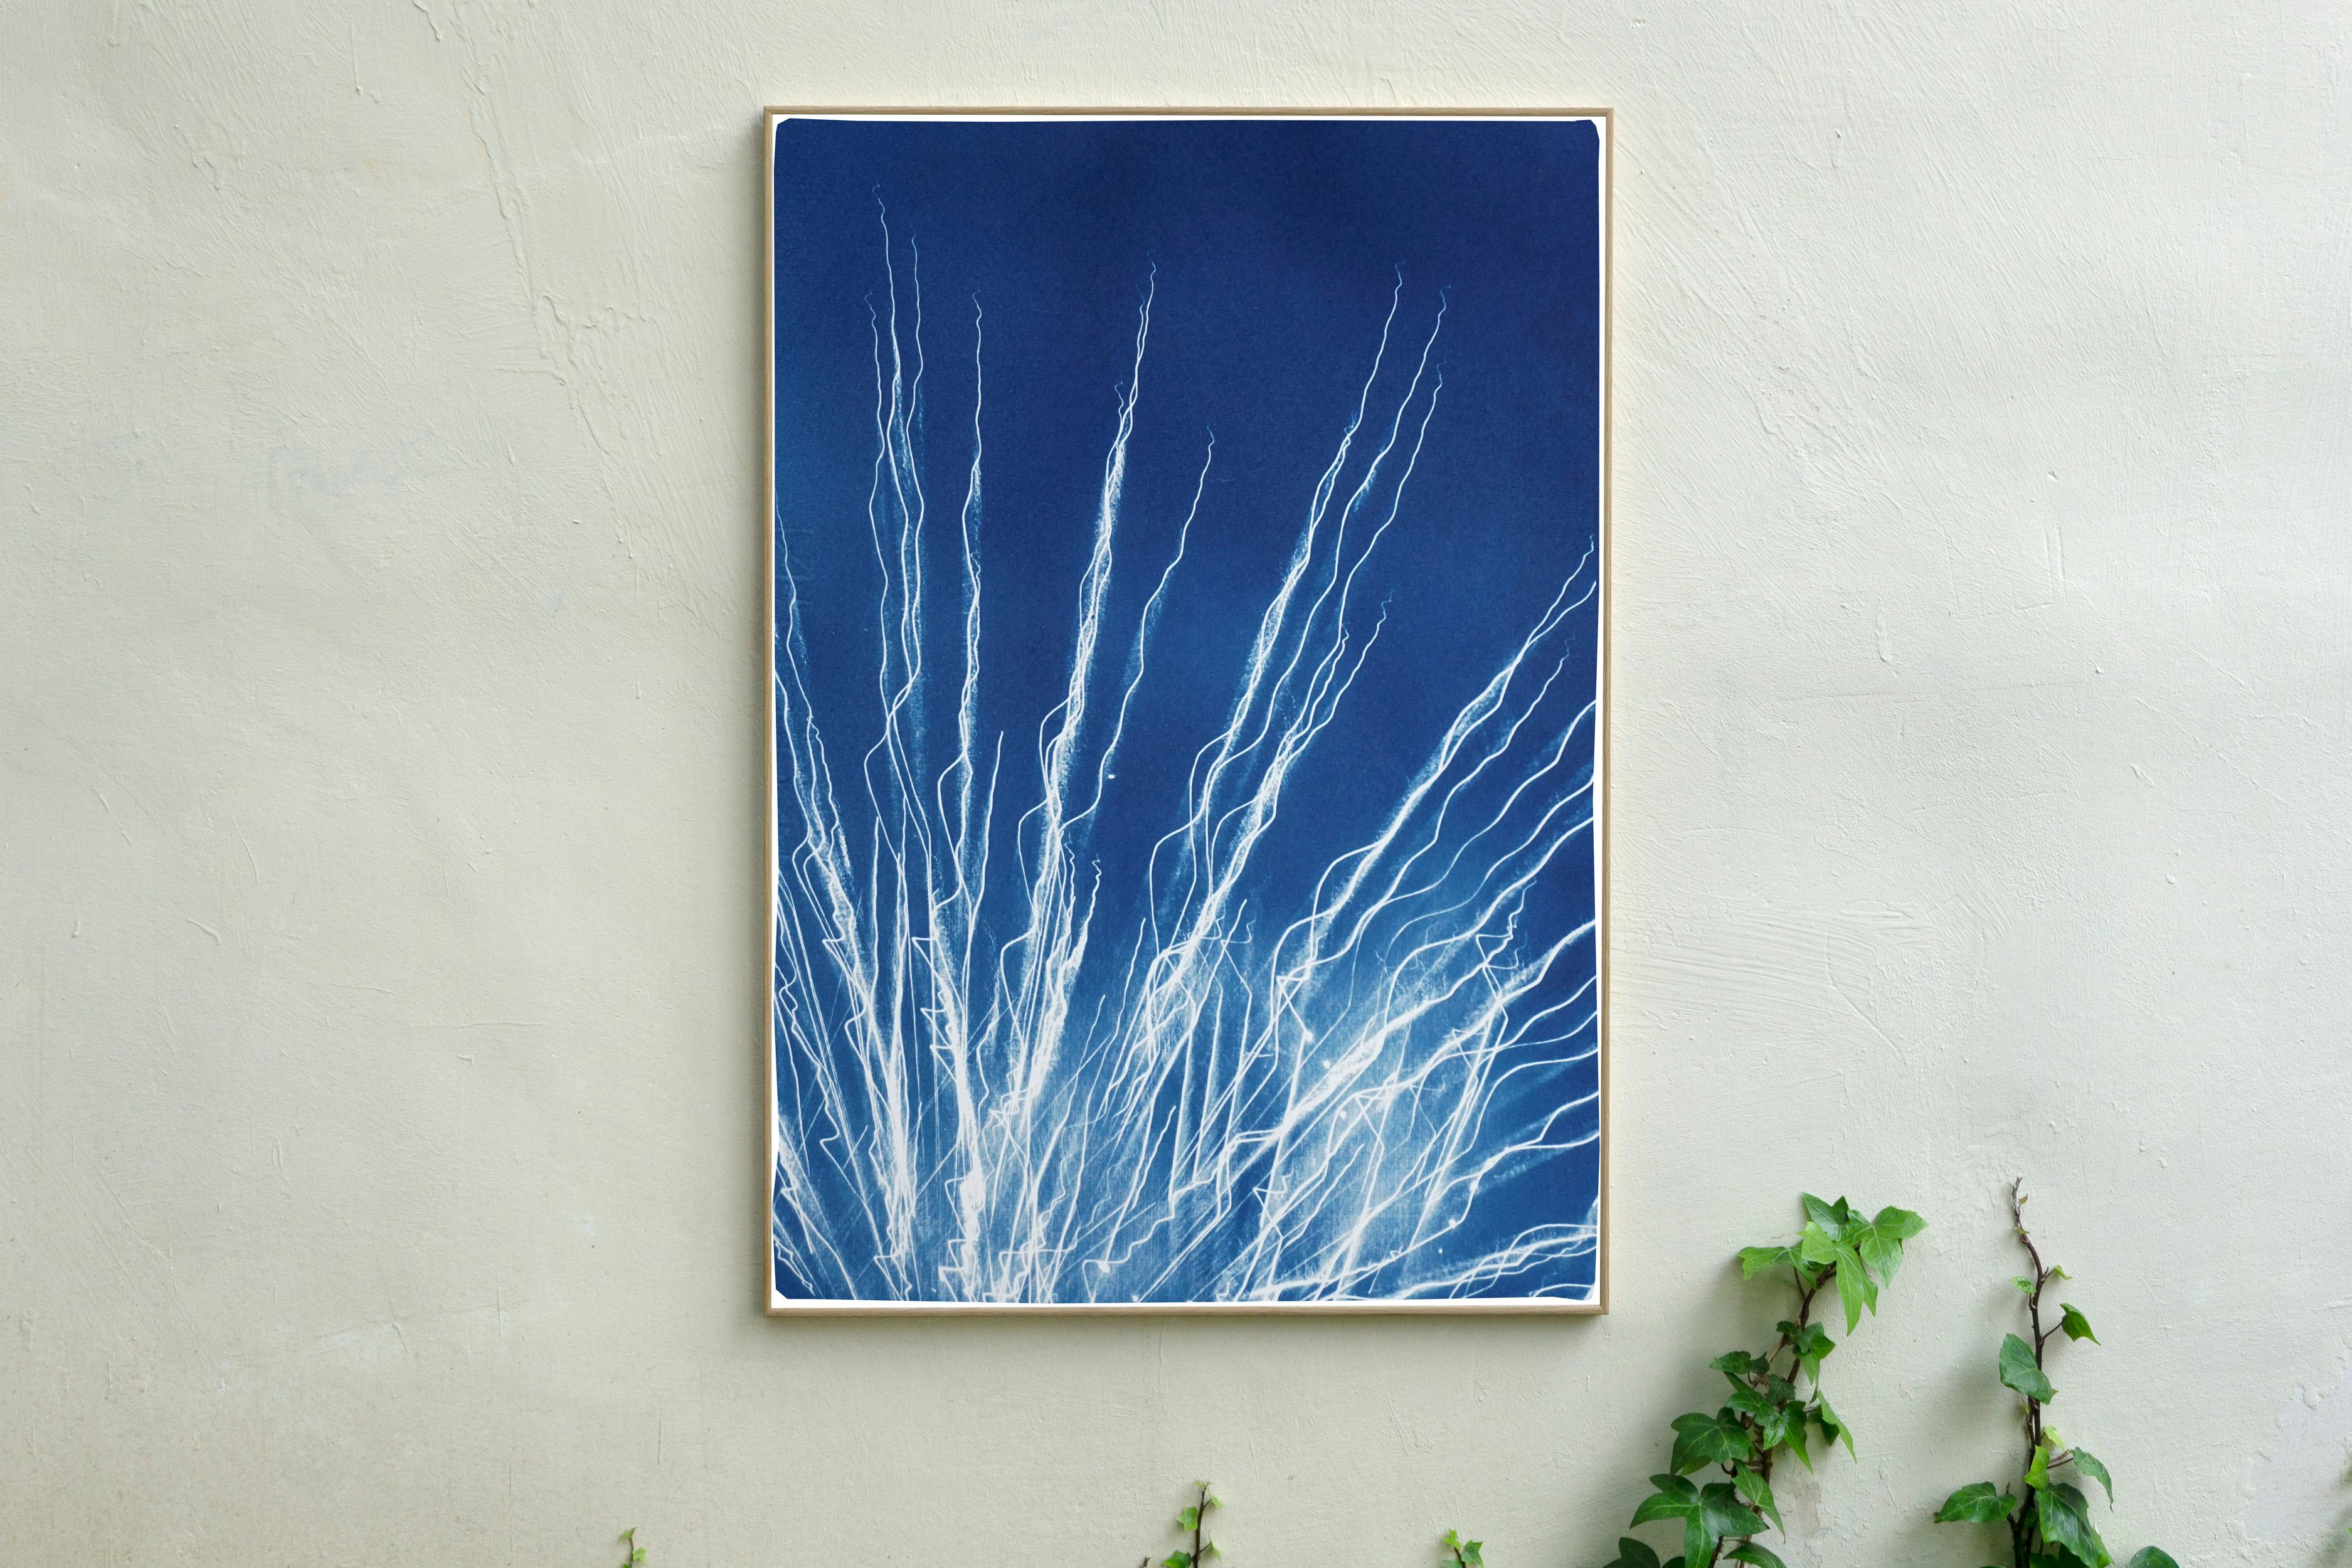 Glowing Fireworks Lights, Blue and White Contemporary Cyanotype on Paper, 2020 1